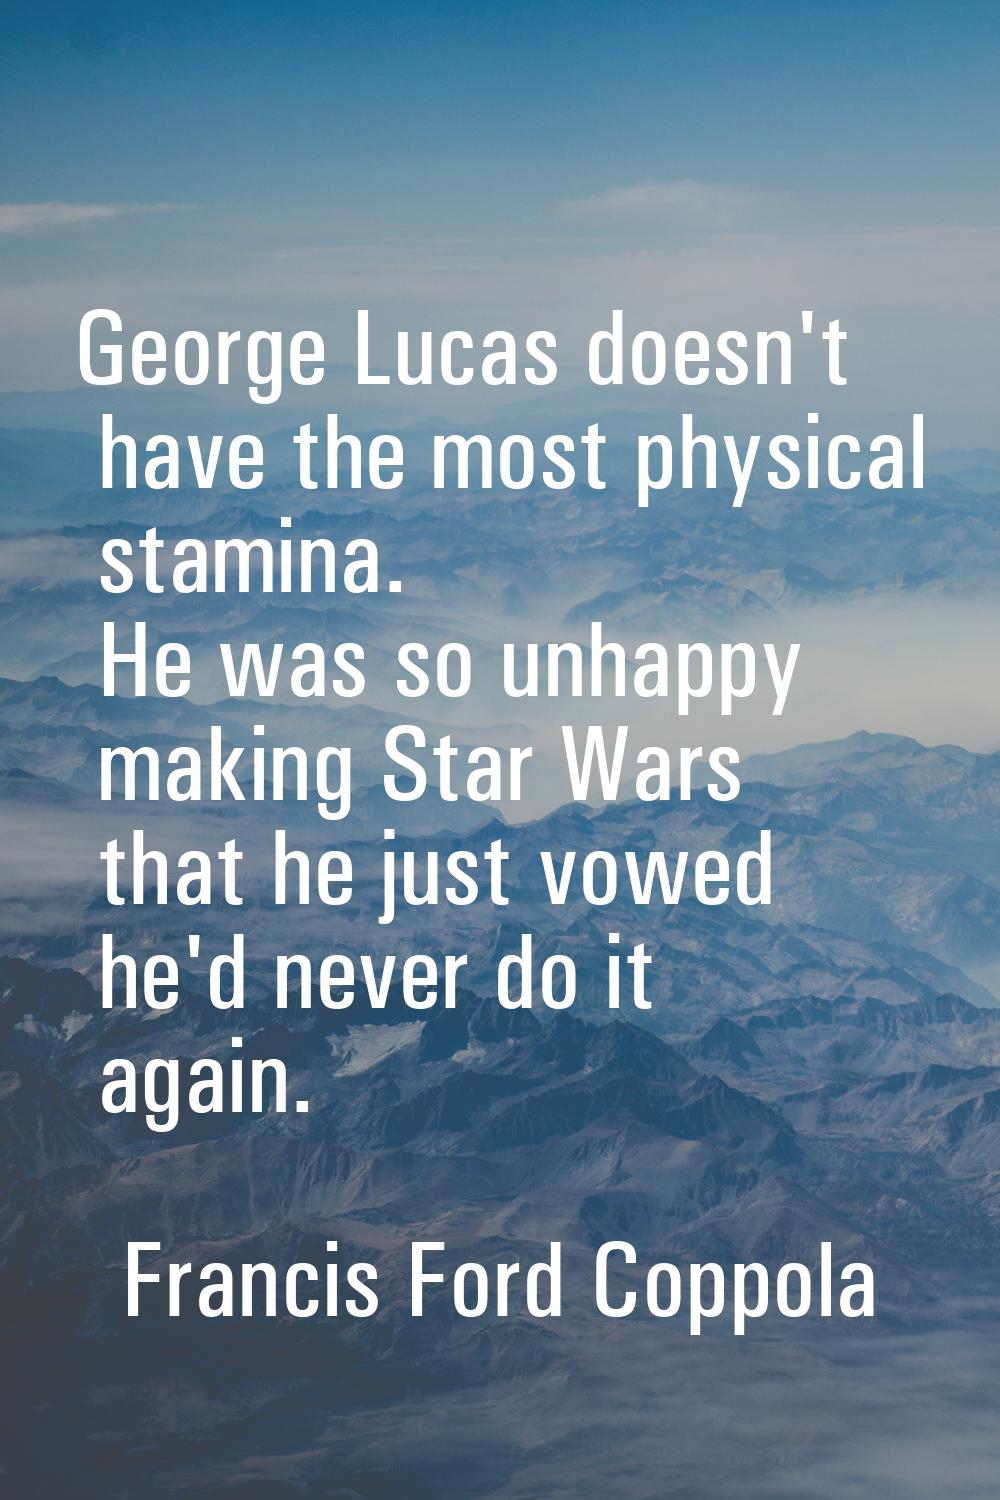 George Lucas doesn't have the most physical stamina. He was so unhappy making Star Wars that he jus